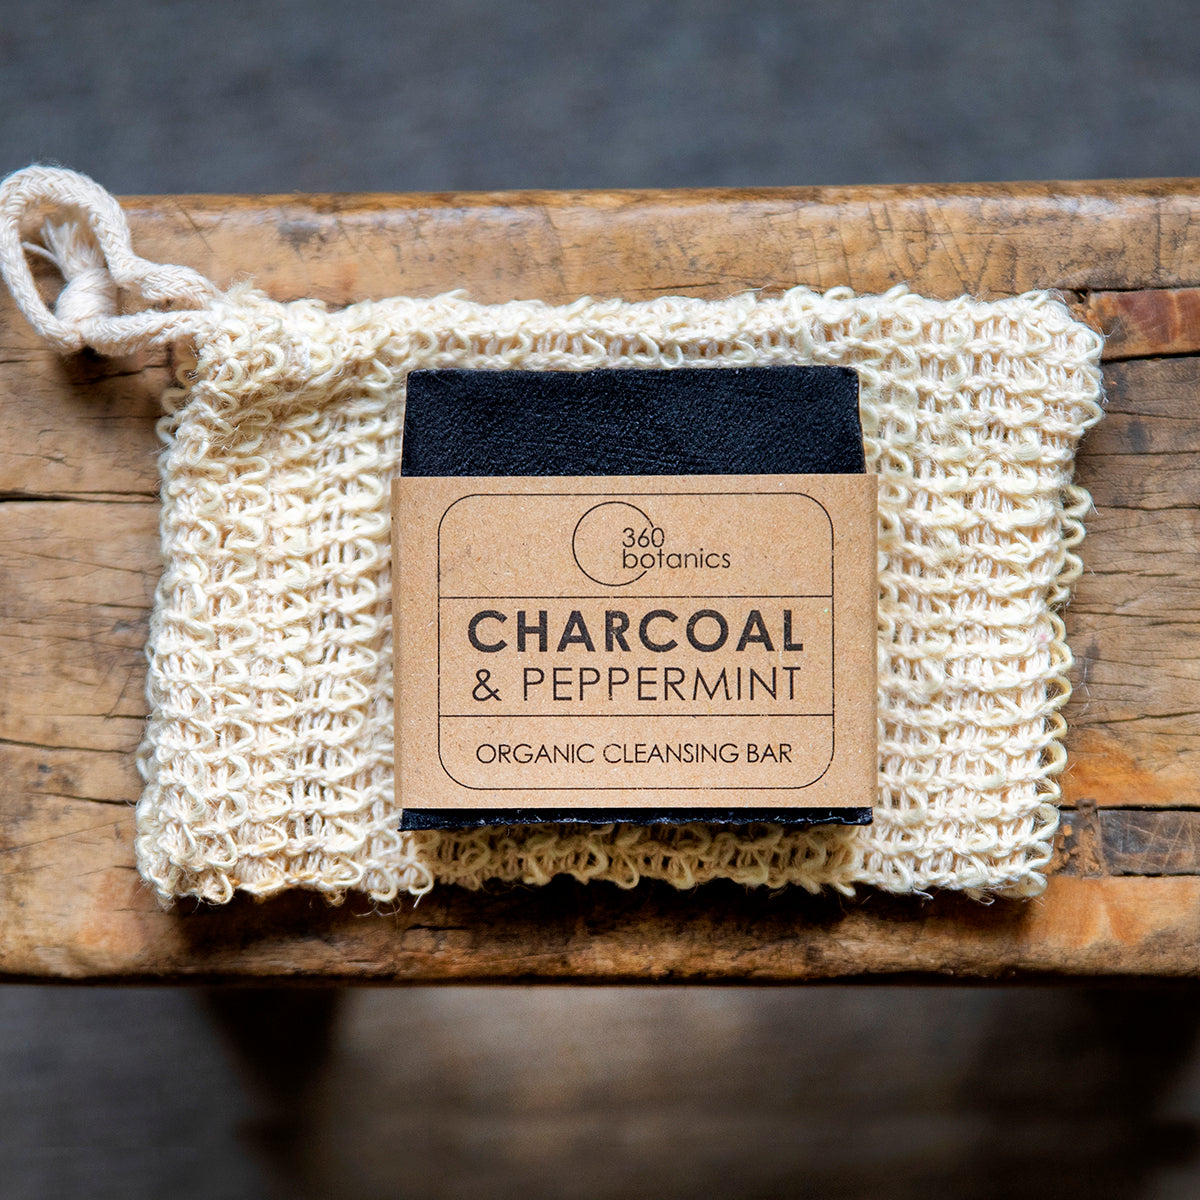 A 360 Botanics Charcoal & Peppermint Organic Cleansing Bar placed on a natural wooden surface, partially wrapped in a textured beige loofah with a hanging loop. The kraft paper label adds an eco-friendly touch, emphasizing the organic nature of the skincare product